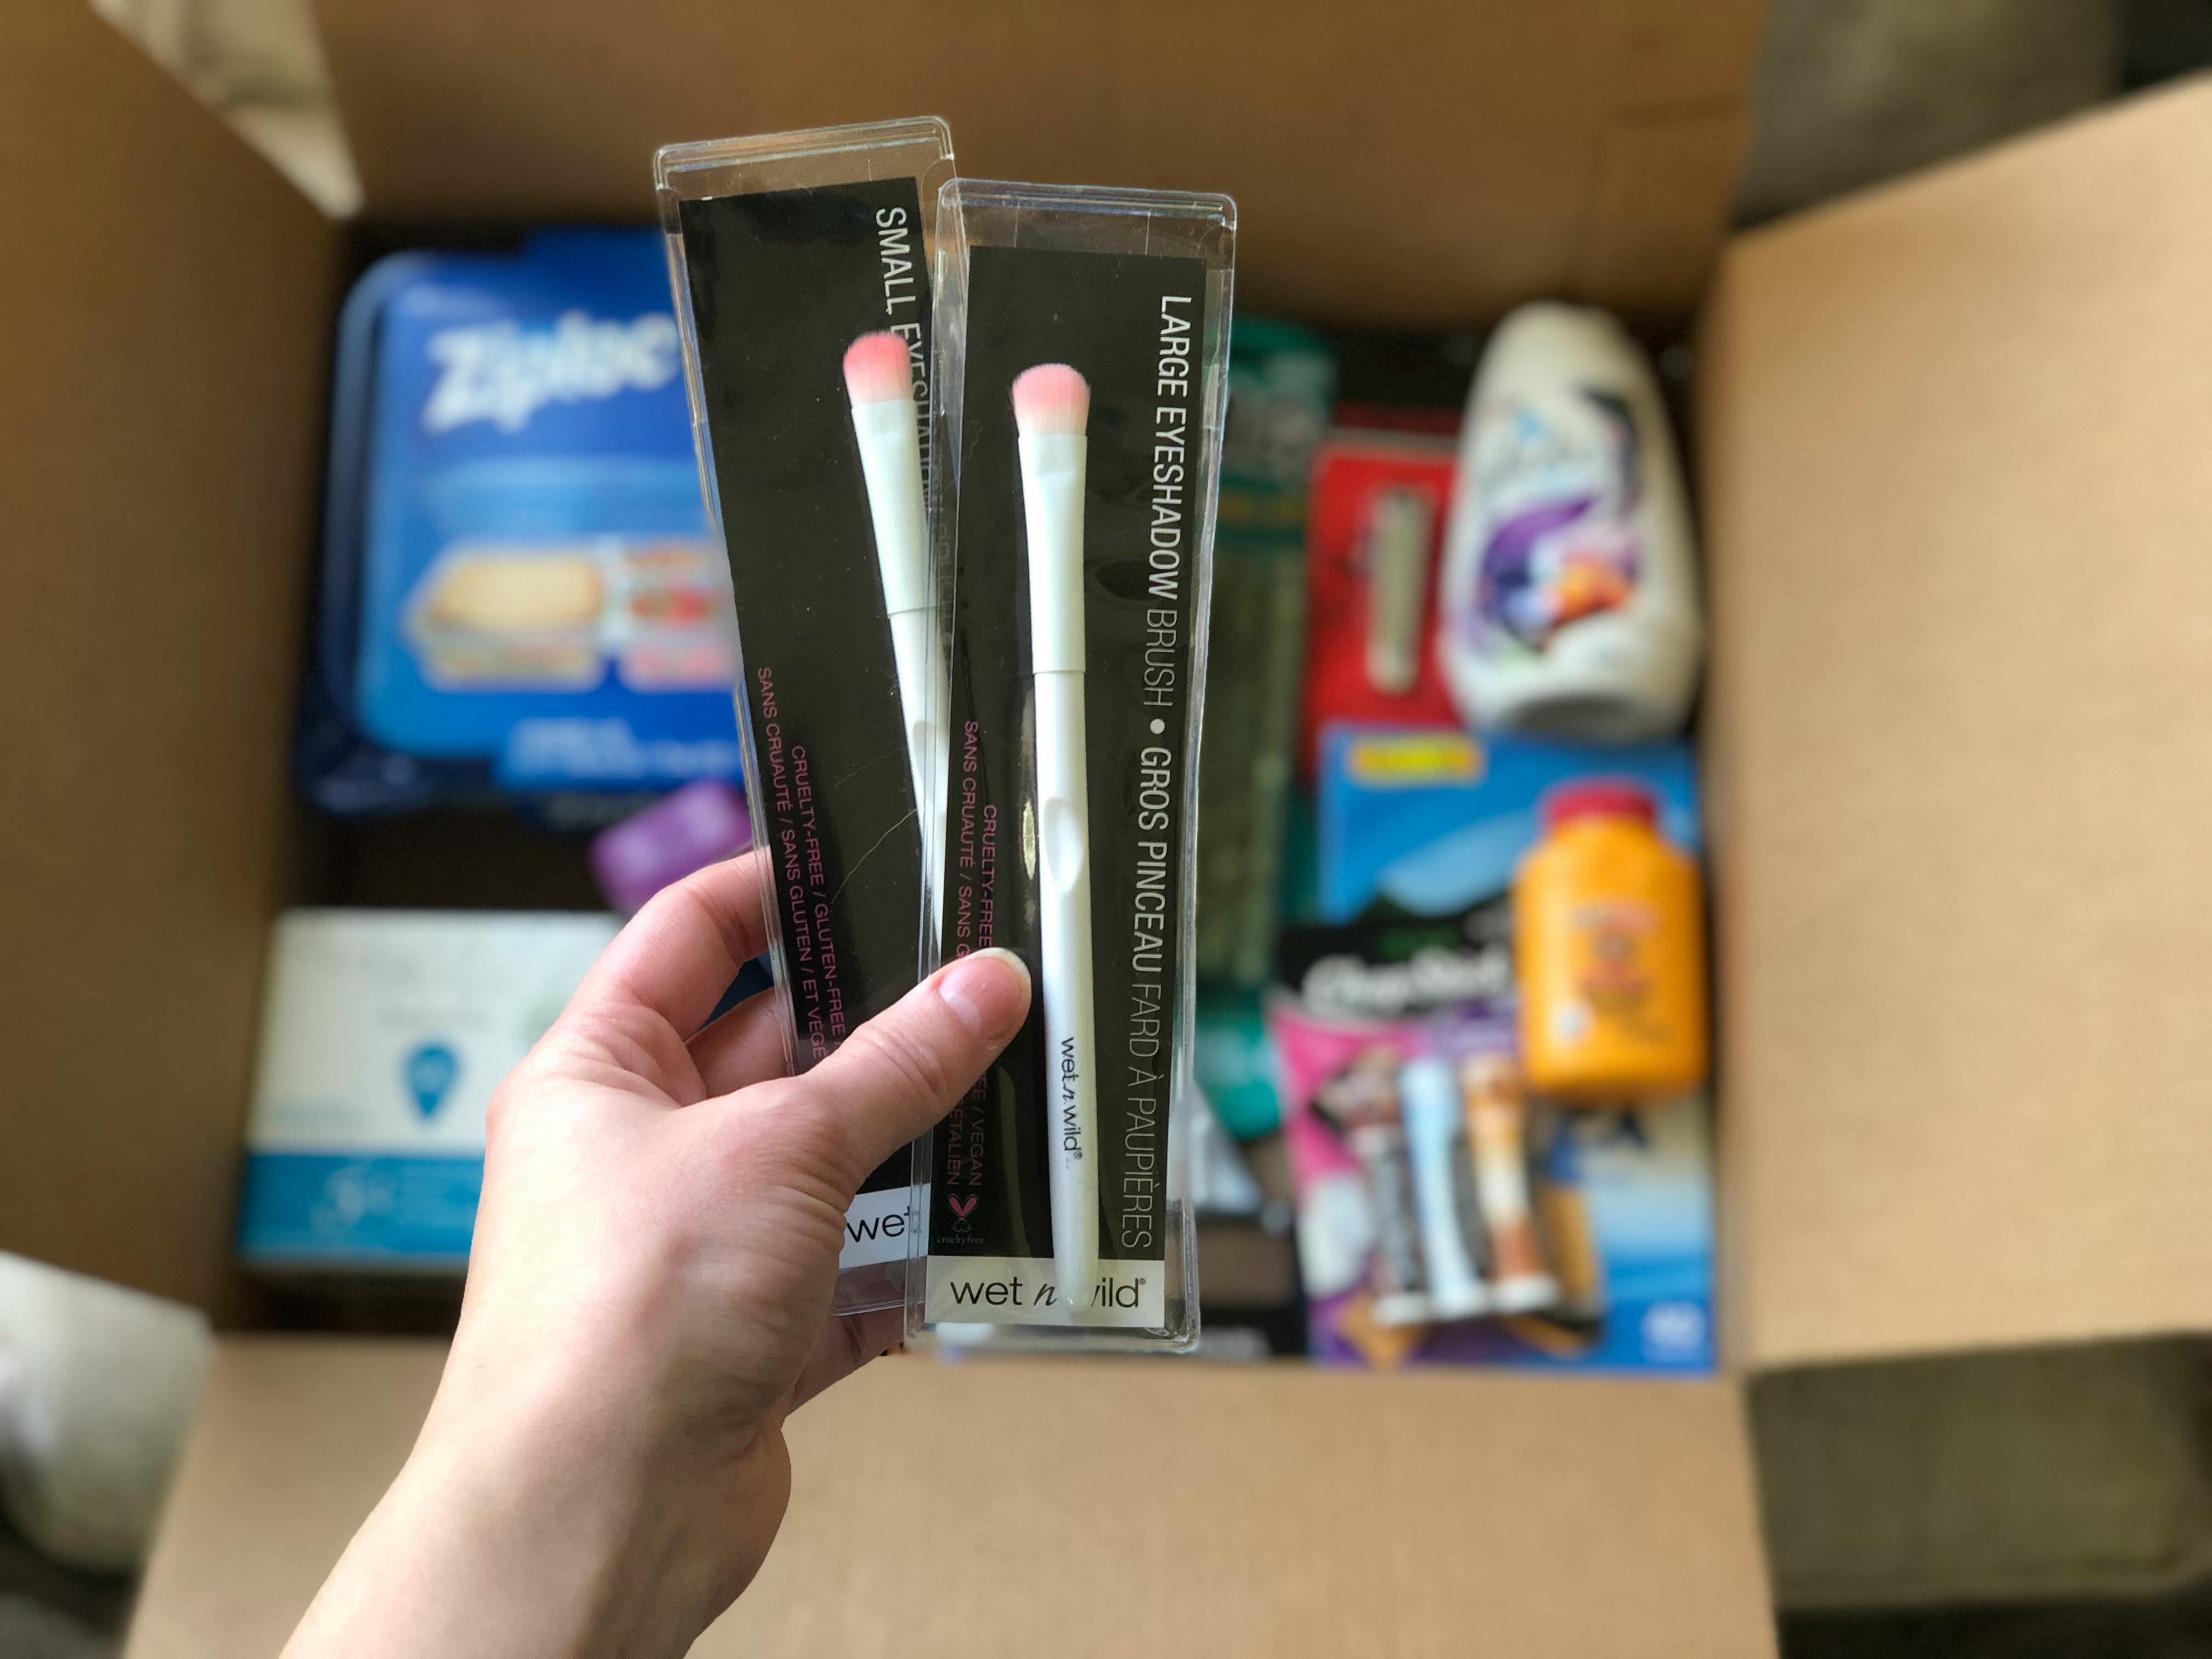 Hand holding Amazon Subscribe & Save items up with a box of household items in the background.